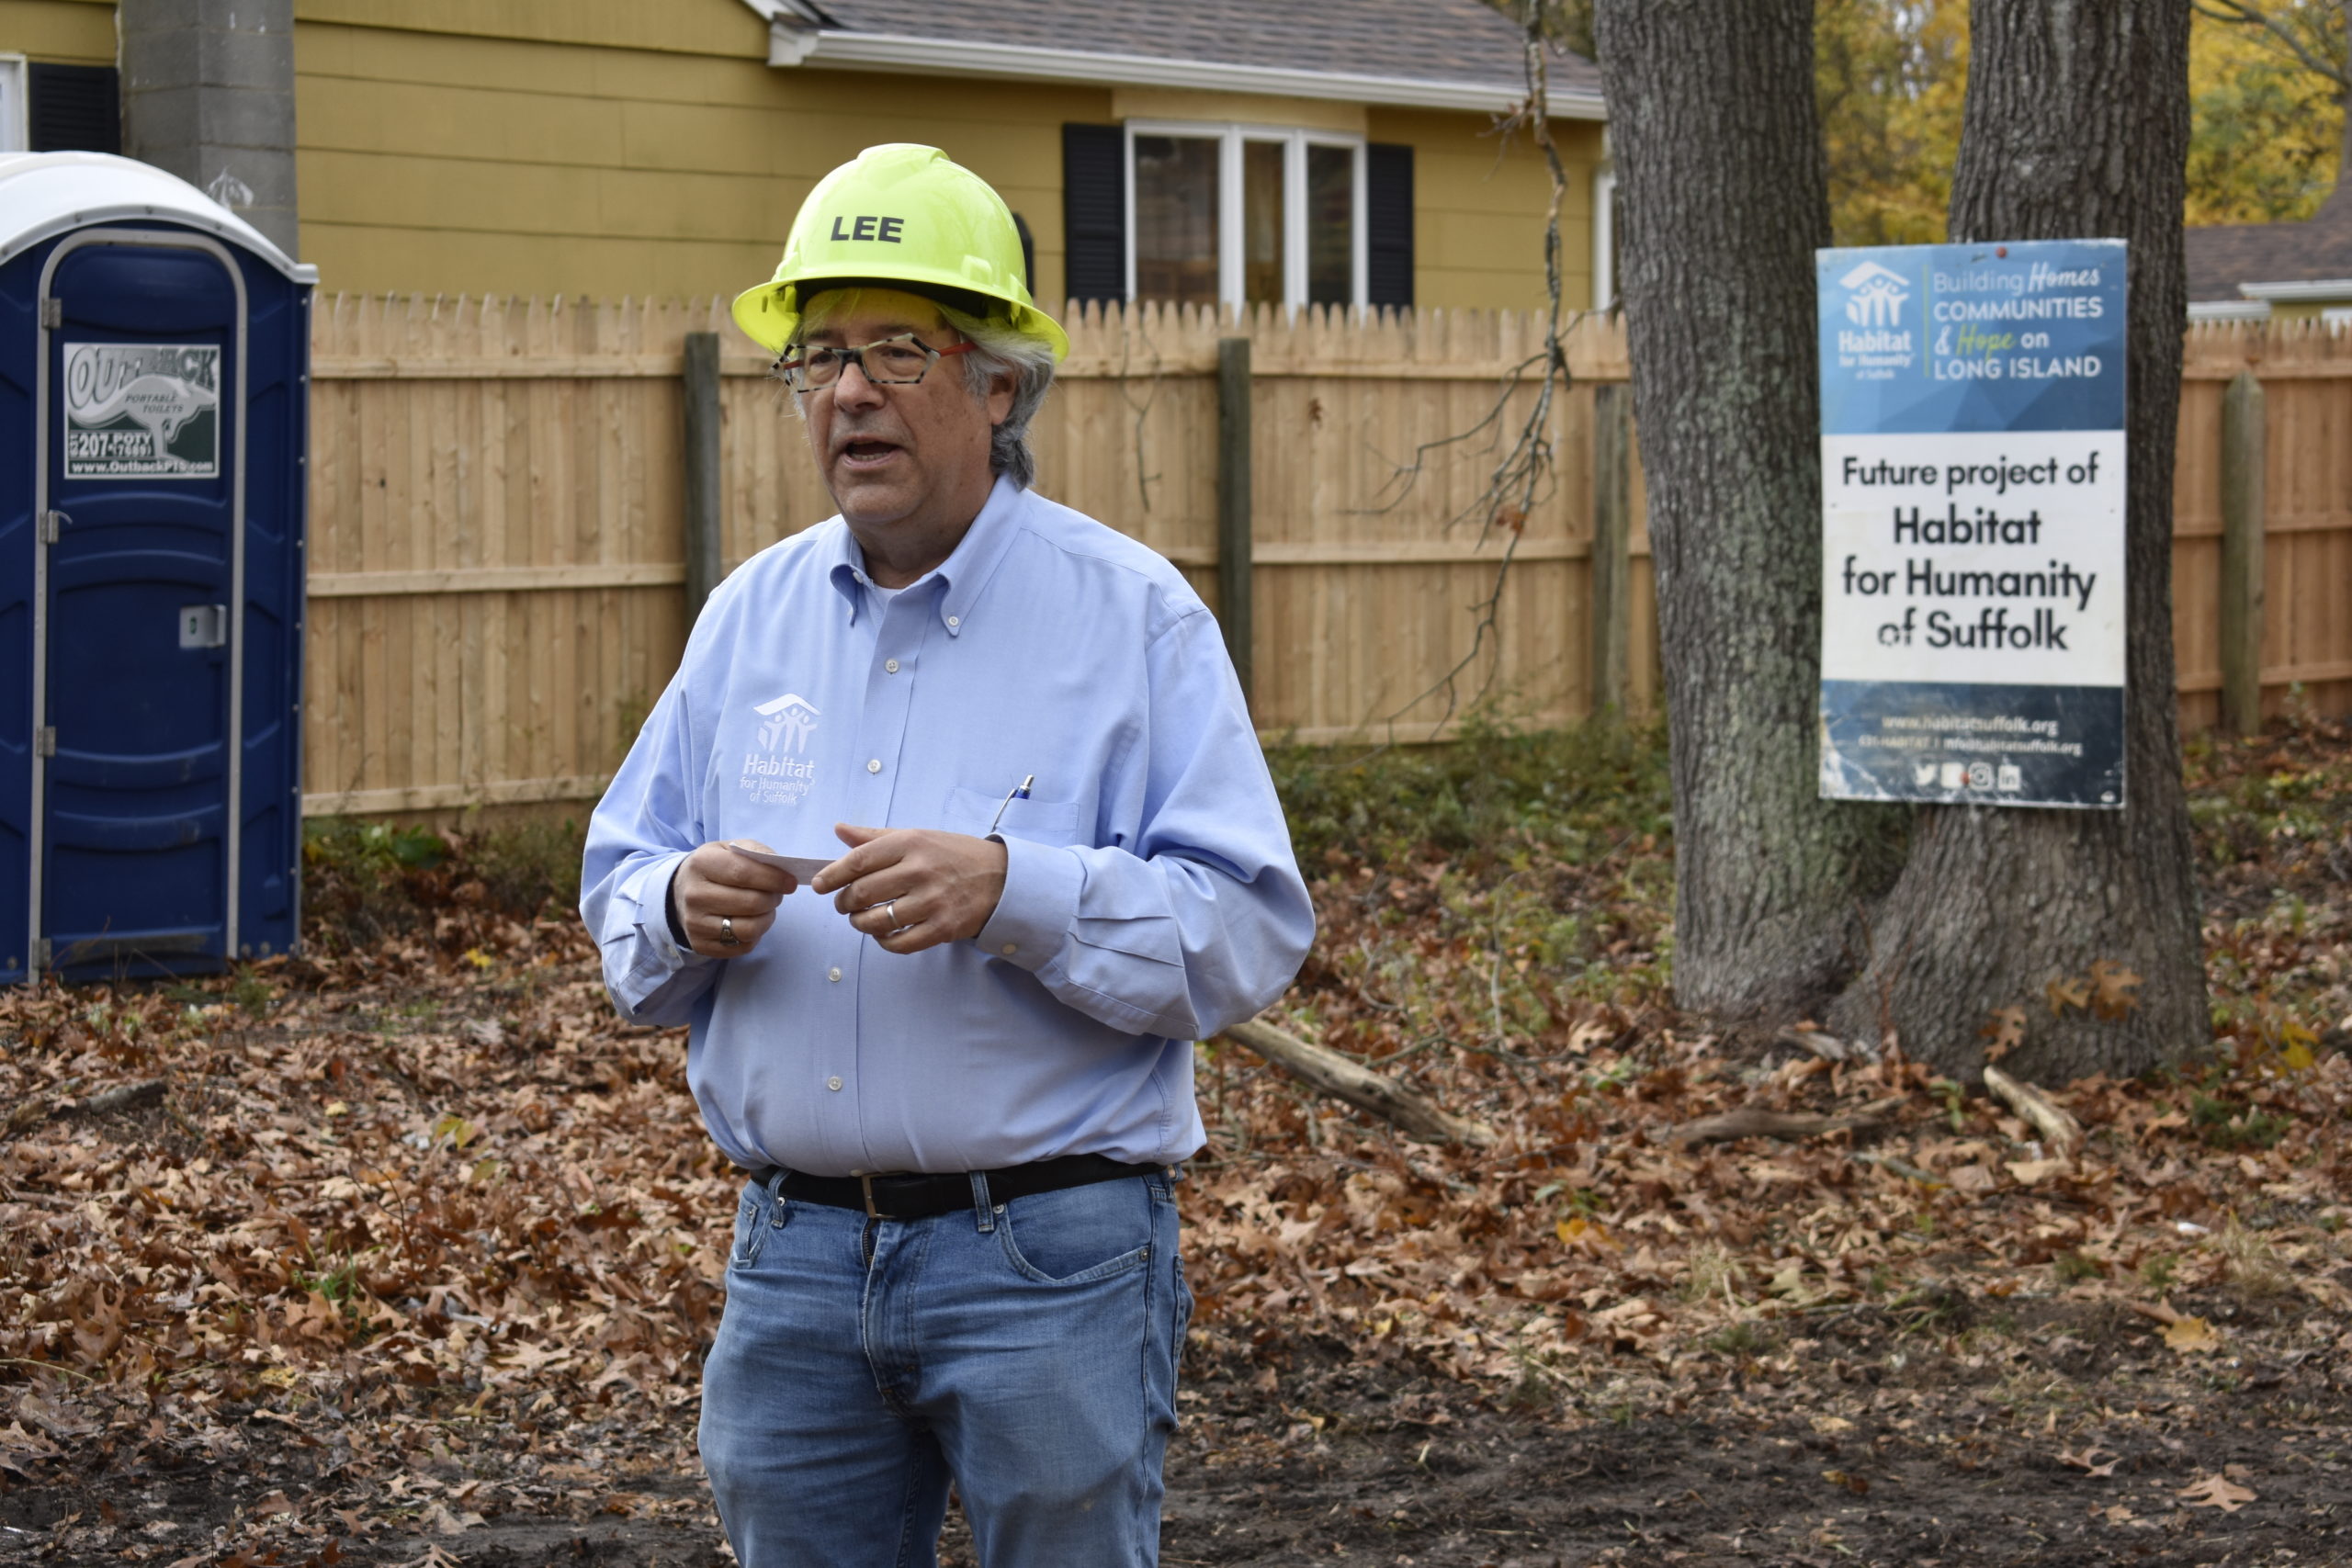 Lee Silberman, the executive director and CEO of Habitat for Humanity of Suffolk.